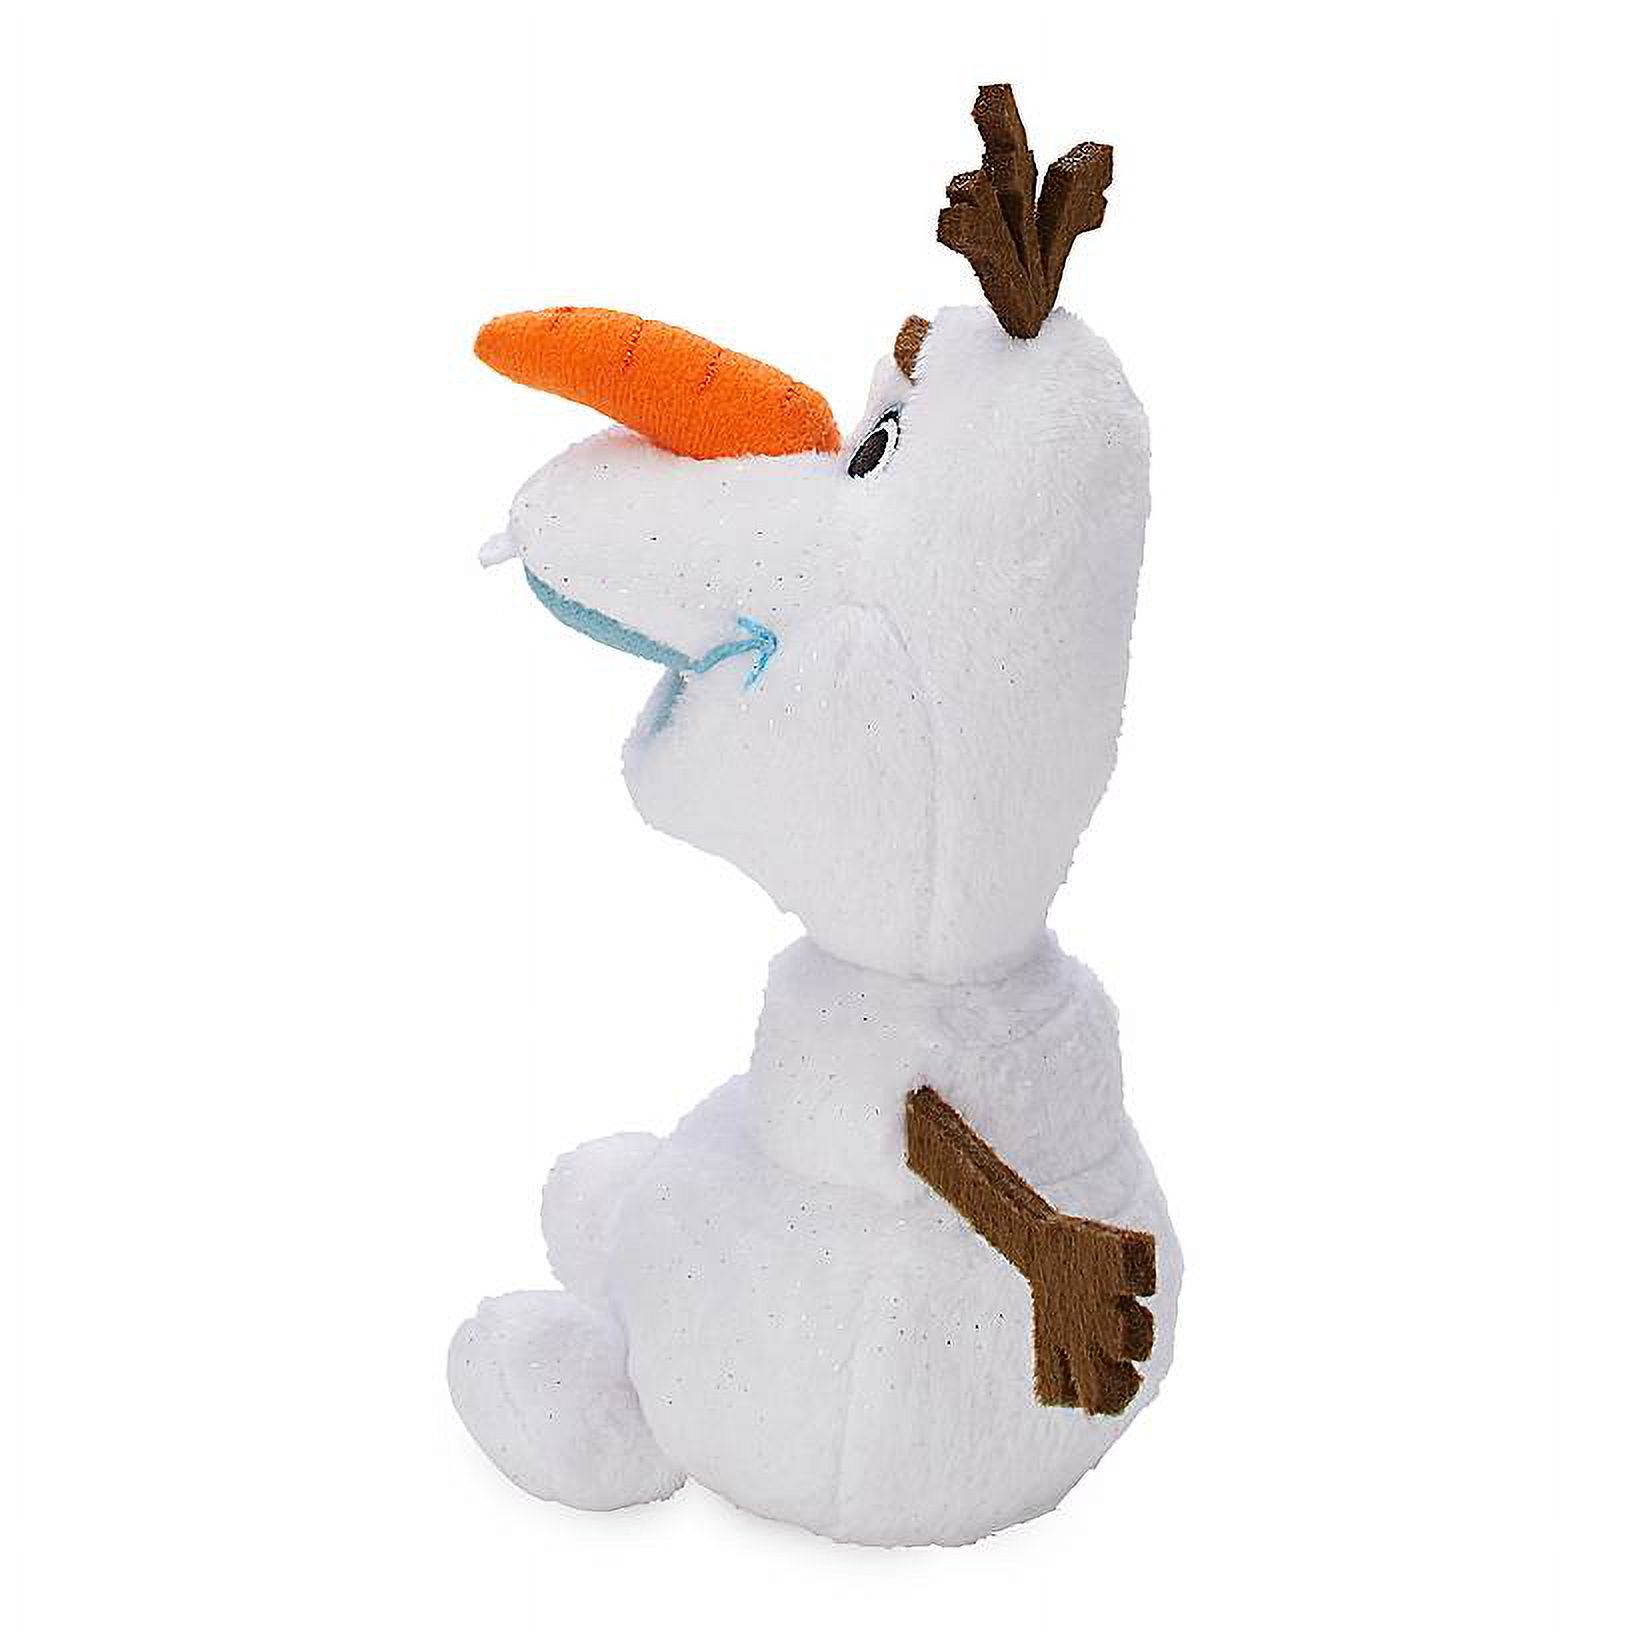 Disney Olaf Plush Frozen 2 Mini Bean Bag 6 1/2'' New with Tags - image 3 of 3